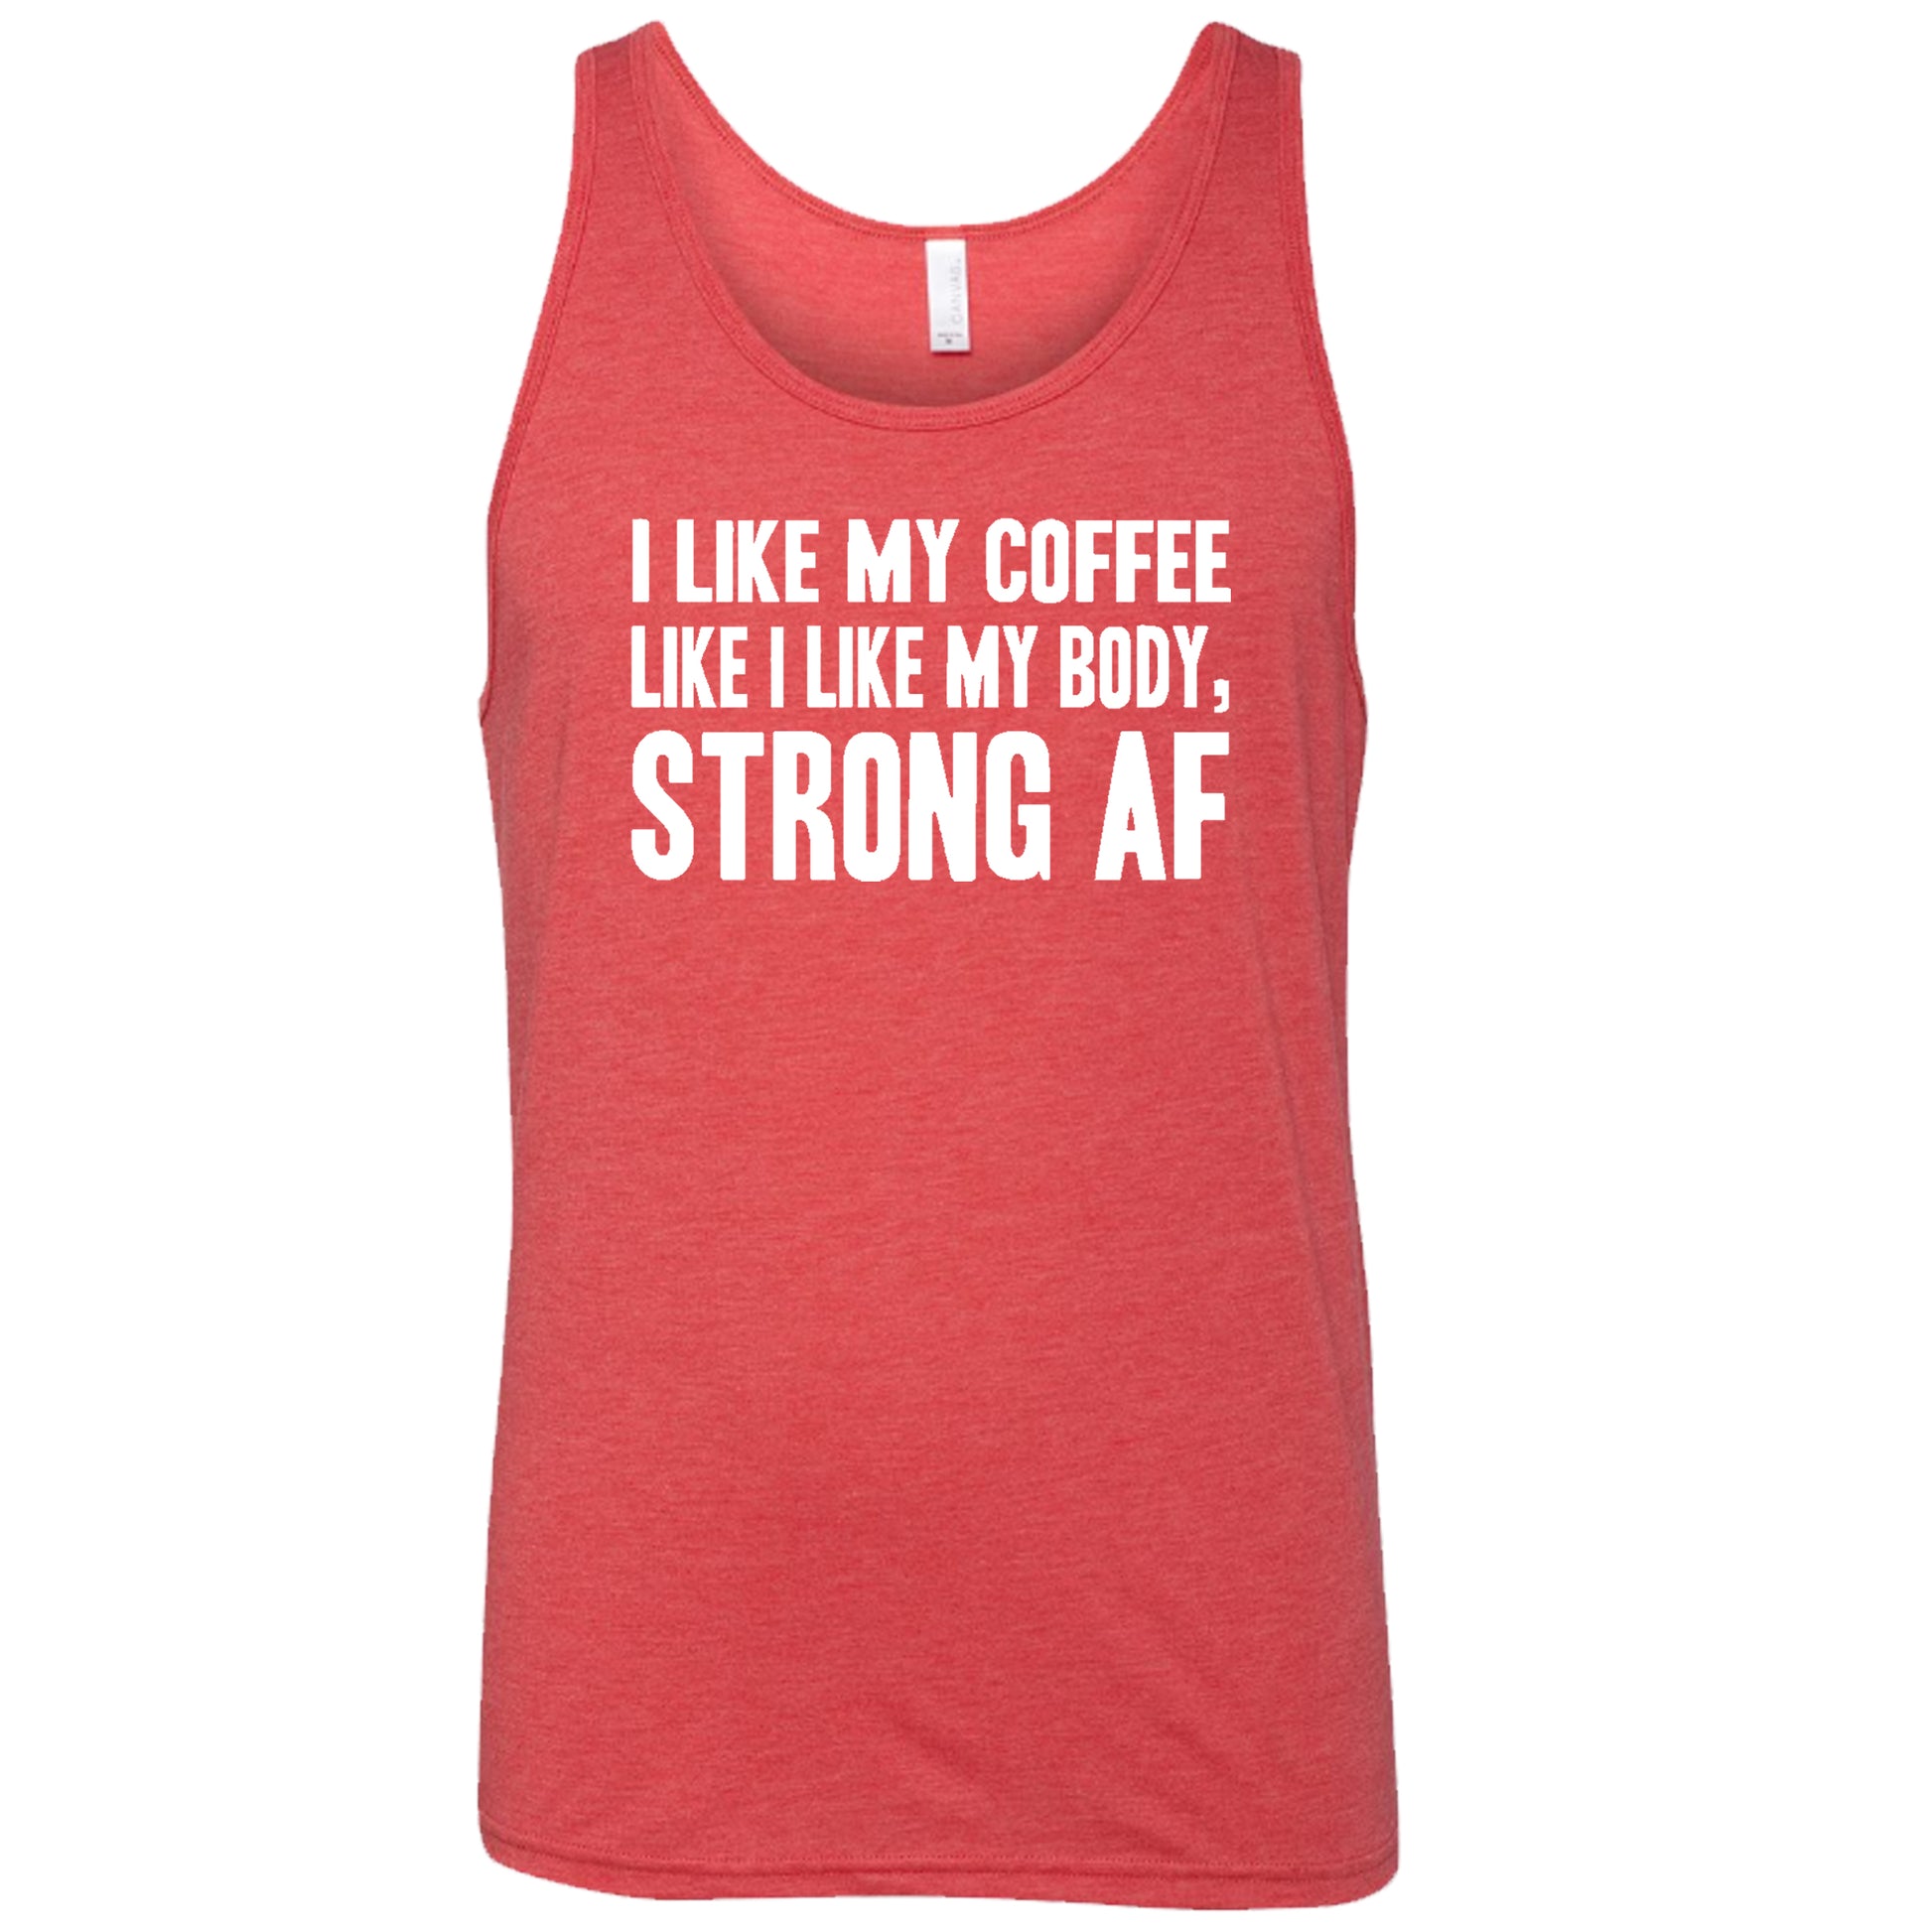 "I Like My Coffee Like I Like My Body Strong AF" quote in white lettering on red tank